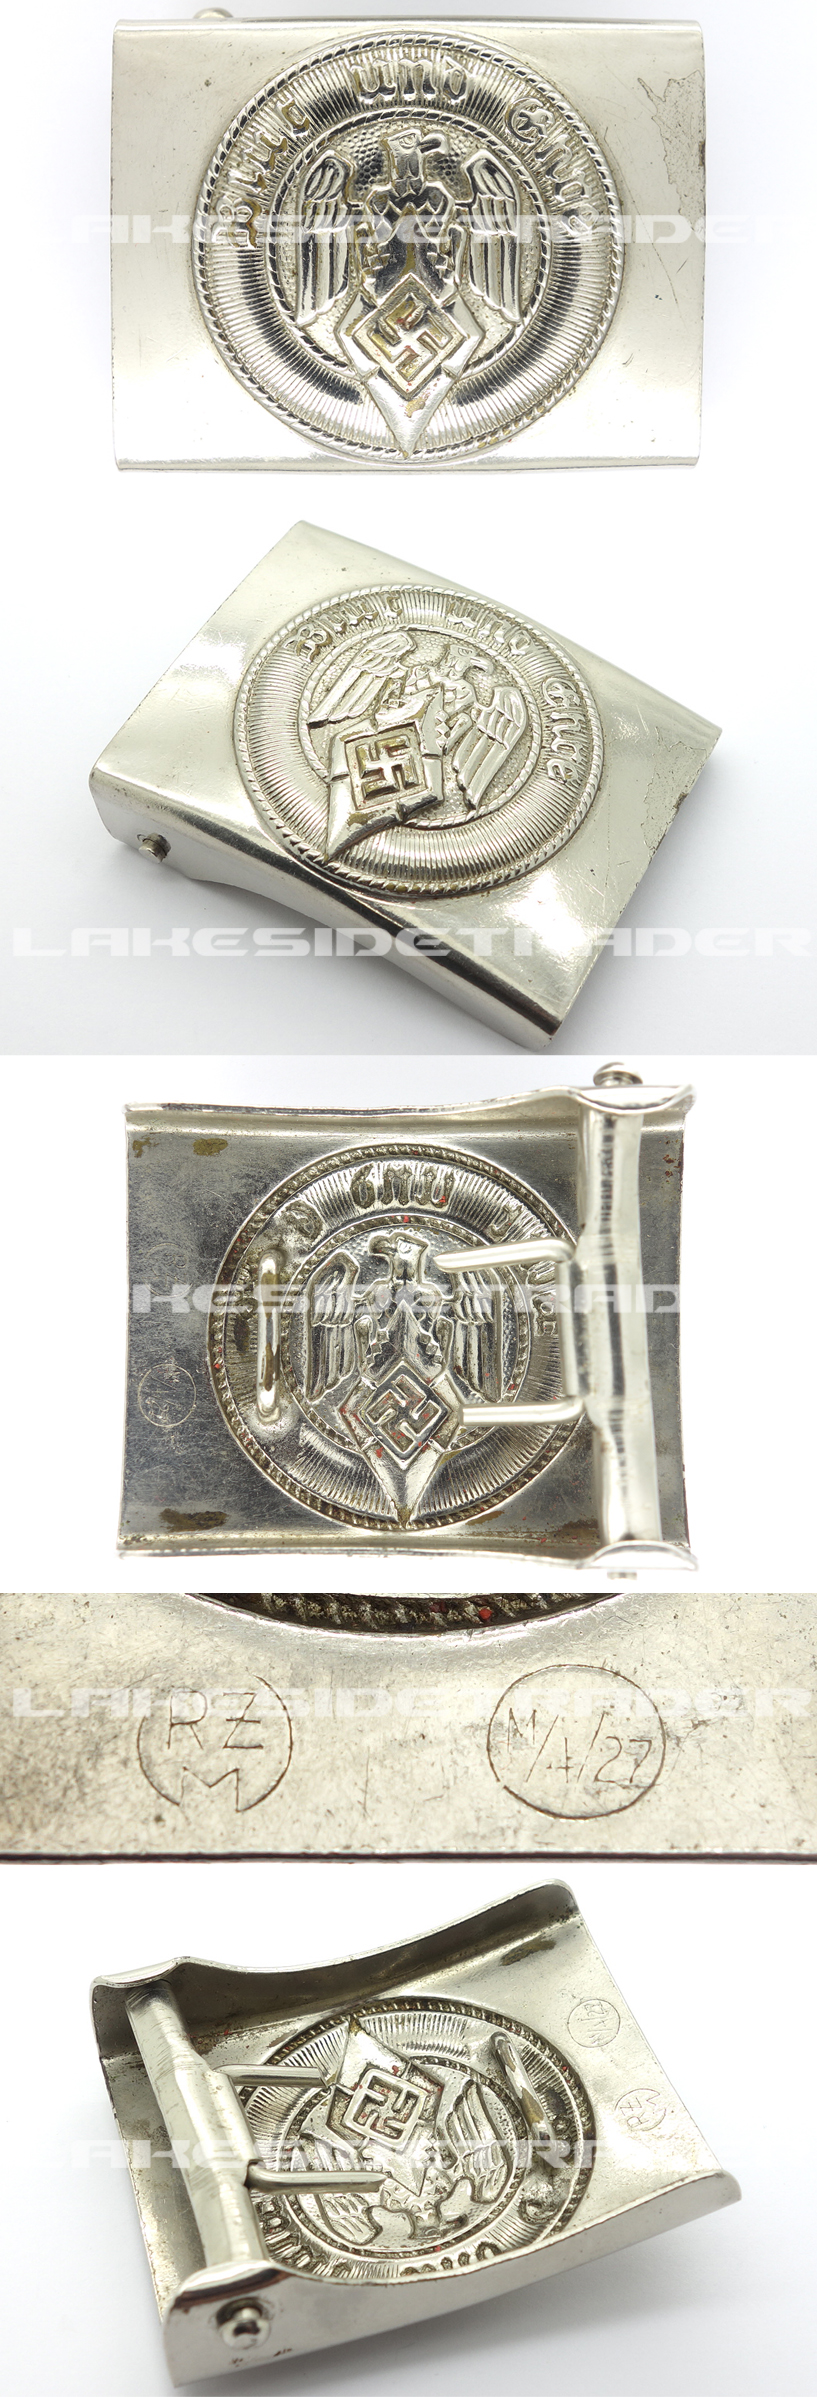 Hitler Youth Belt Buckle by Overhoff